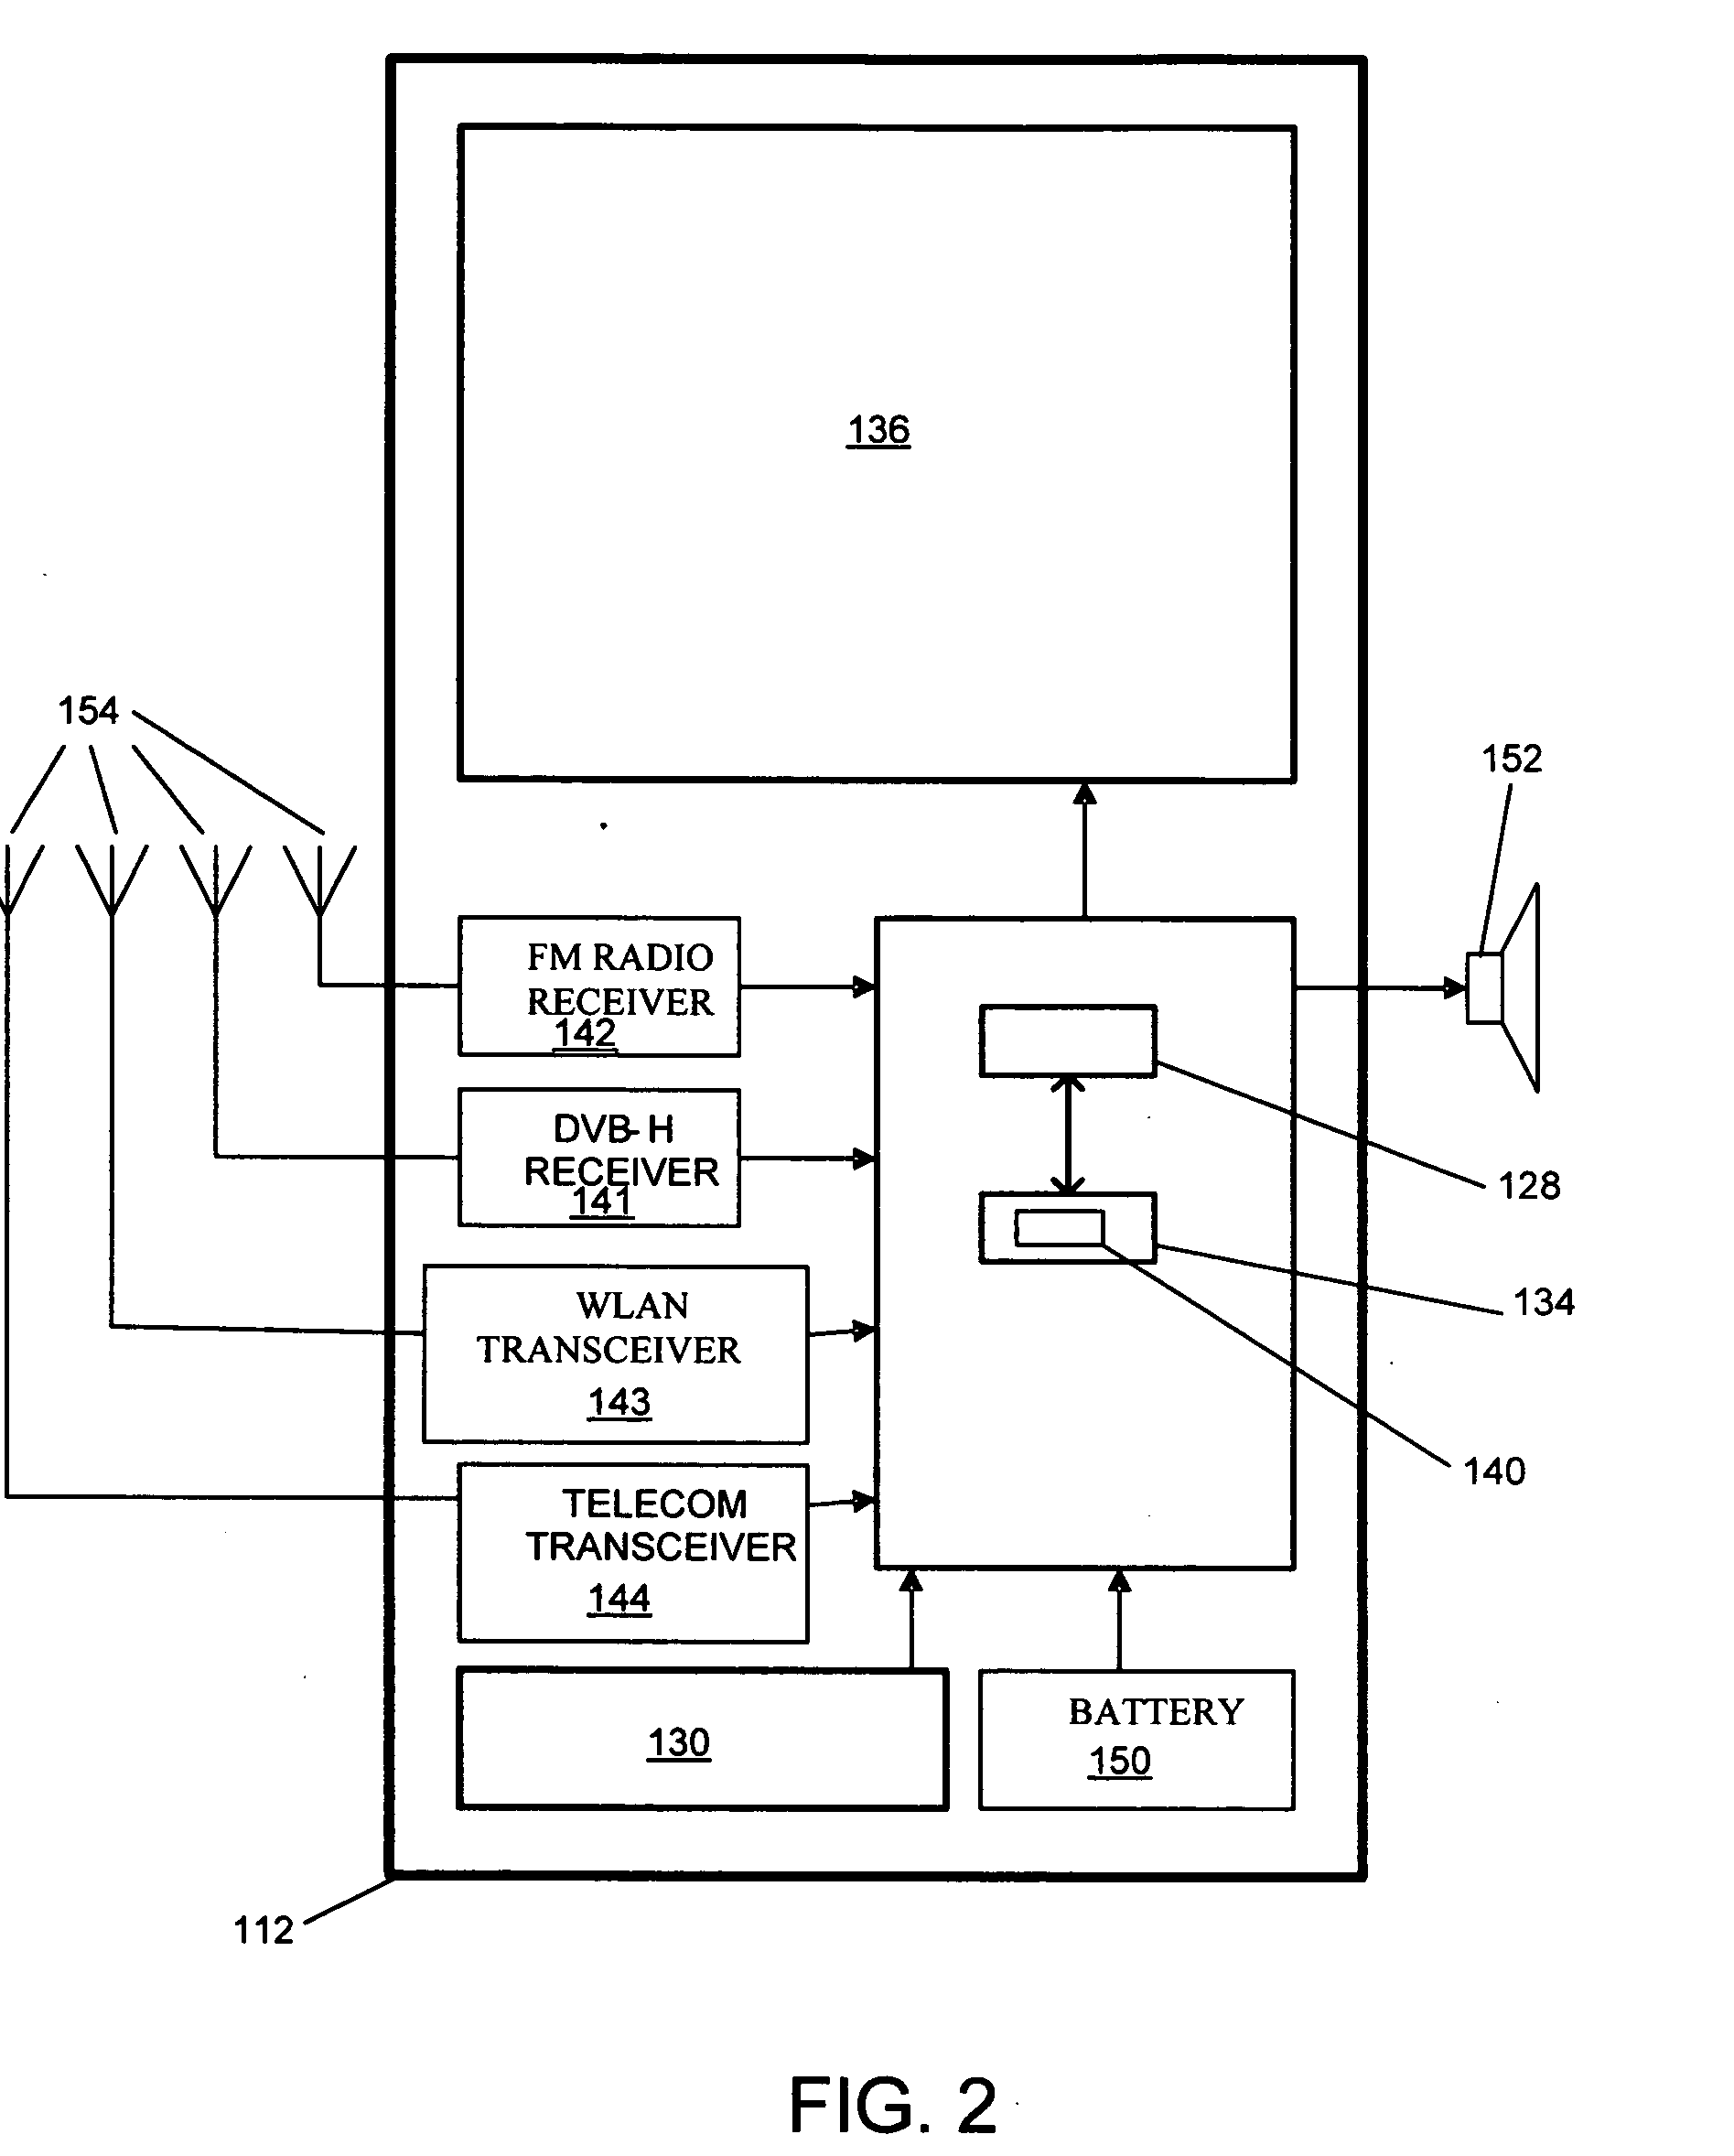 Method and system for providing quick service access